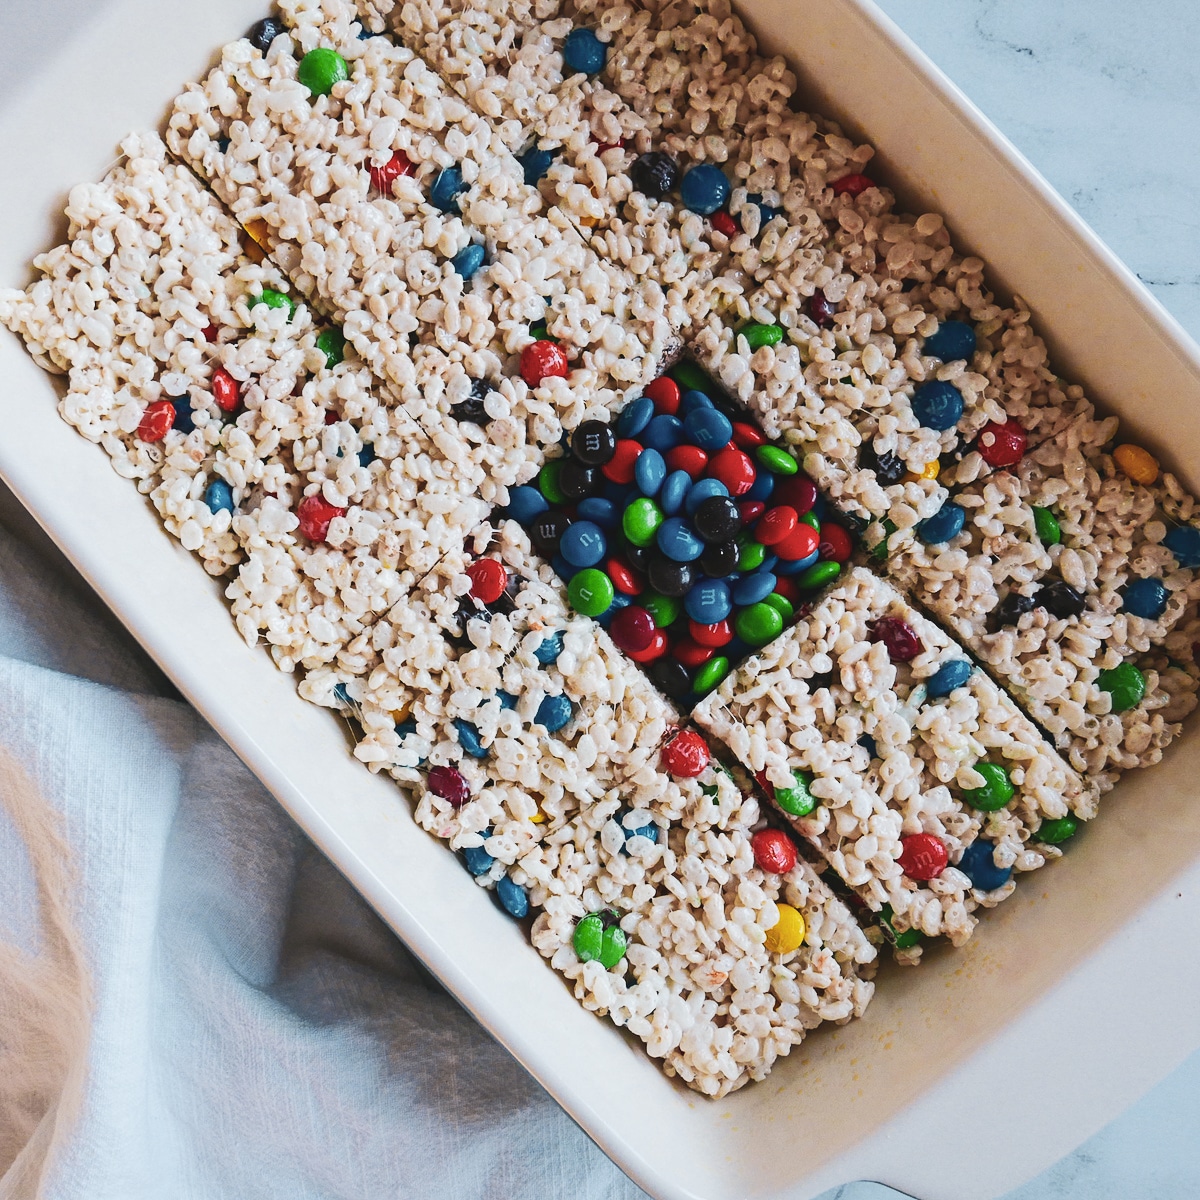 pan of rice krispie treats with m&m's poured into one cut square area.